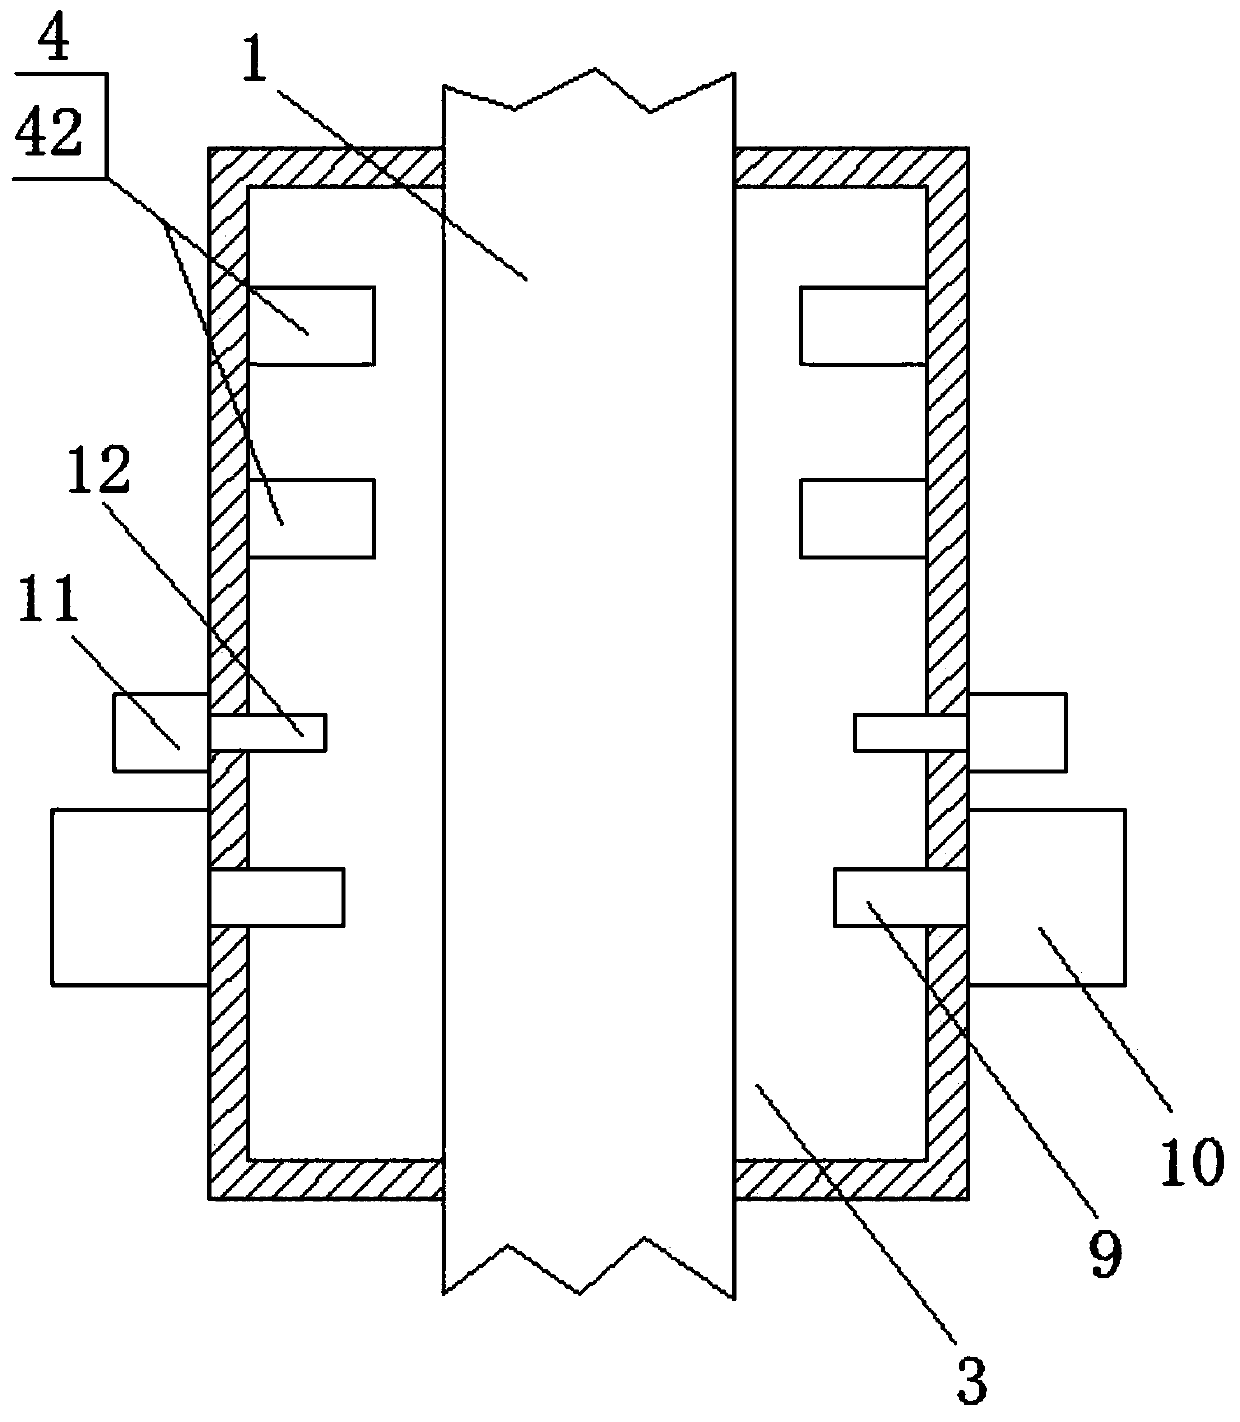 Cleaning and drying integration device for mechanical parts